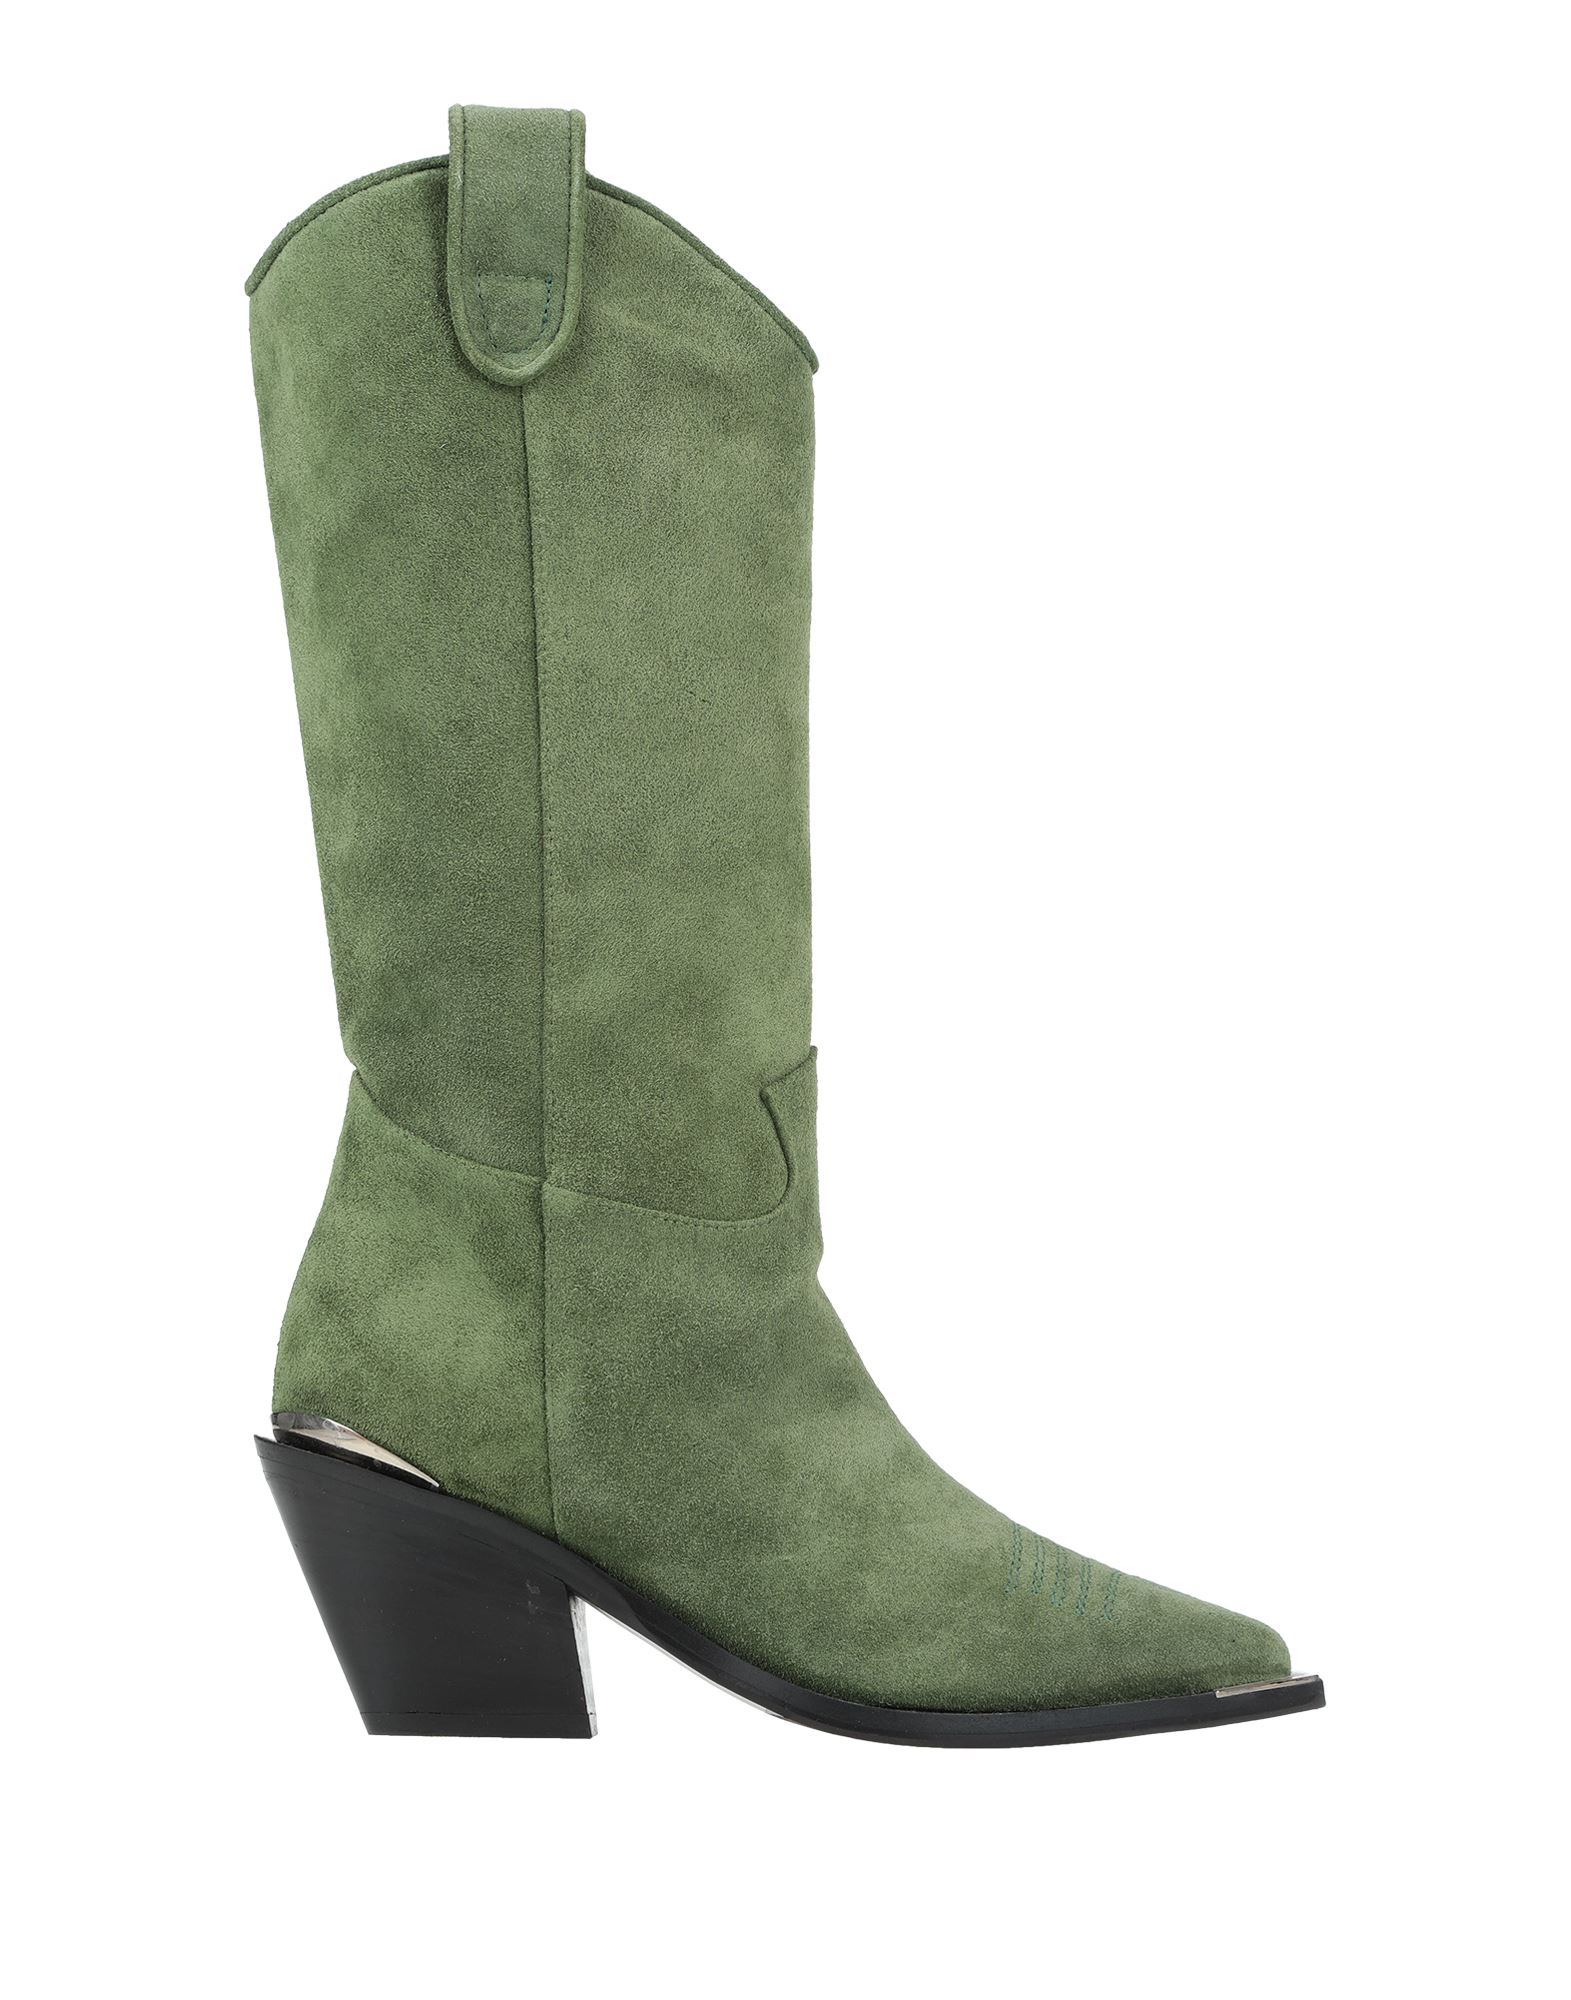 Aldo Castagna For Shabby Chic Knee Boots In Green